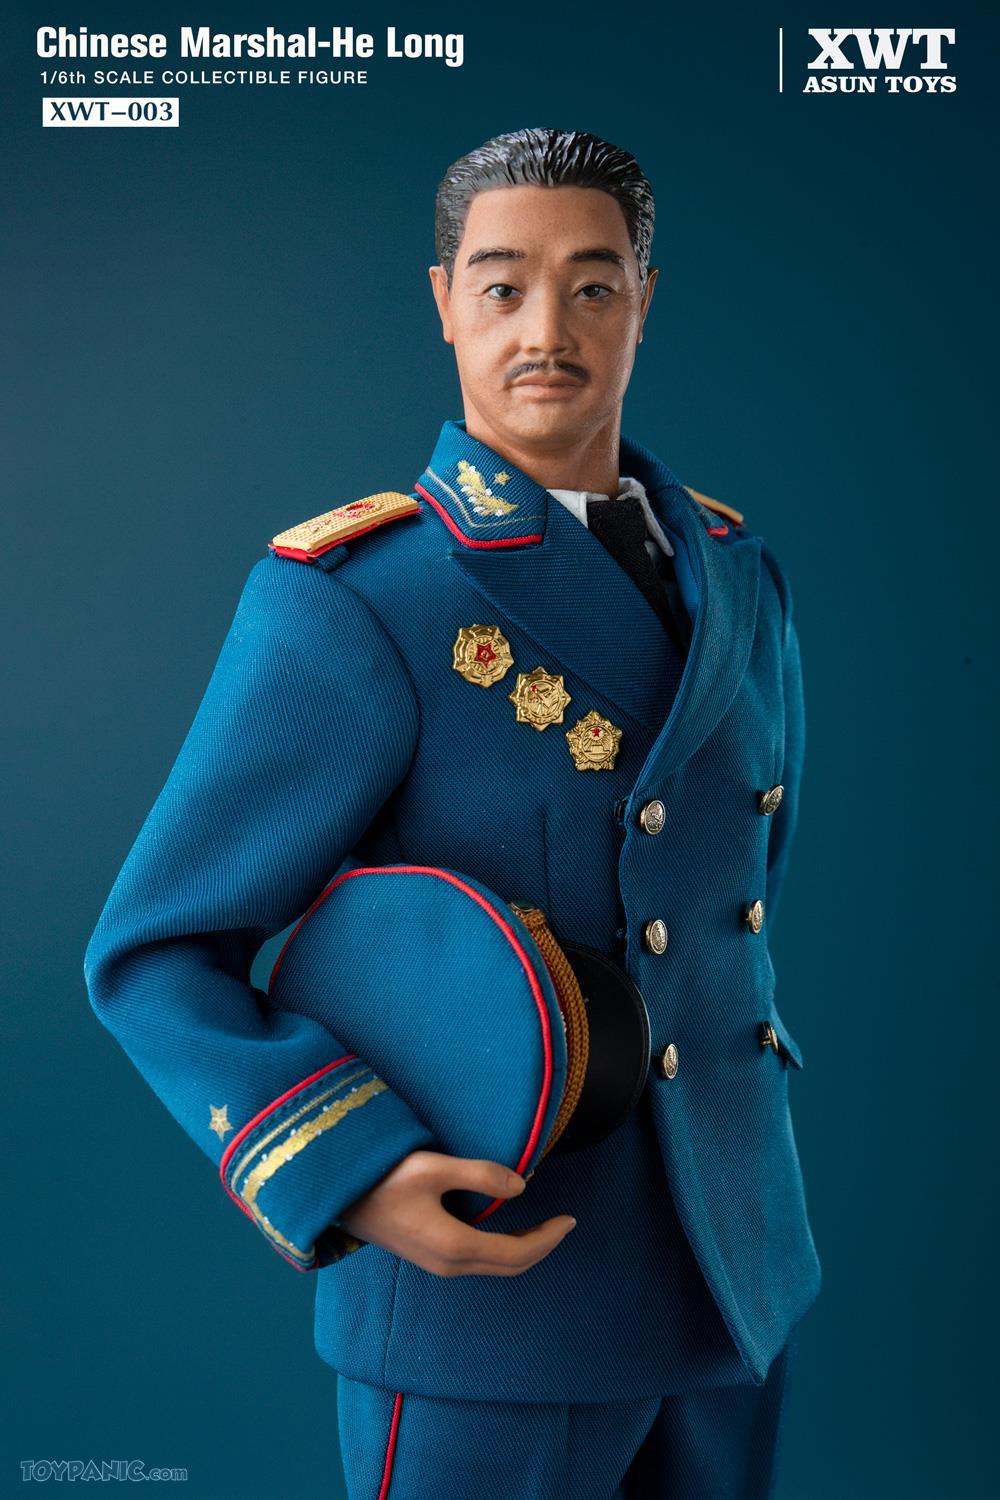 NEW PRODUCT: XWT ASUN TOYS: 1/6 Chinese Marshal - He Long (XWT-003) 14620215